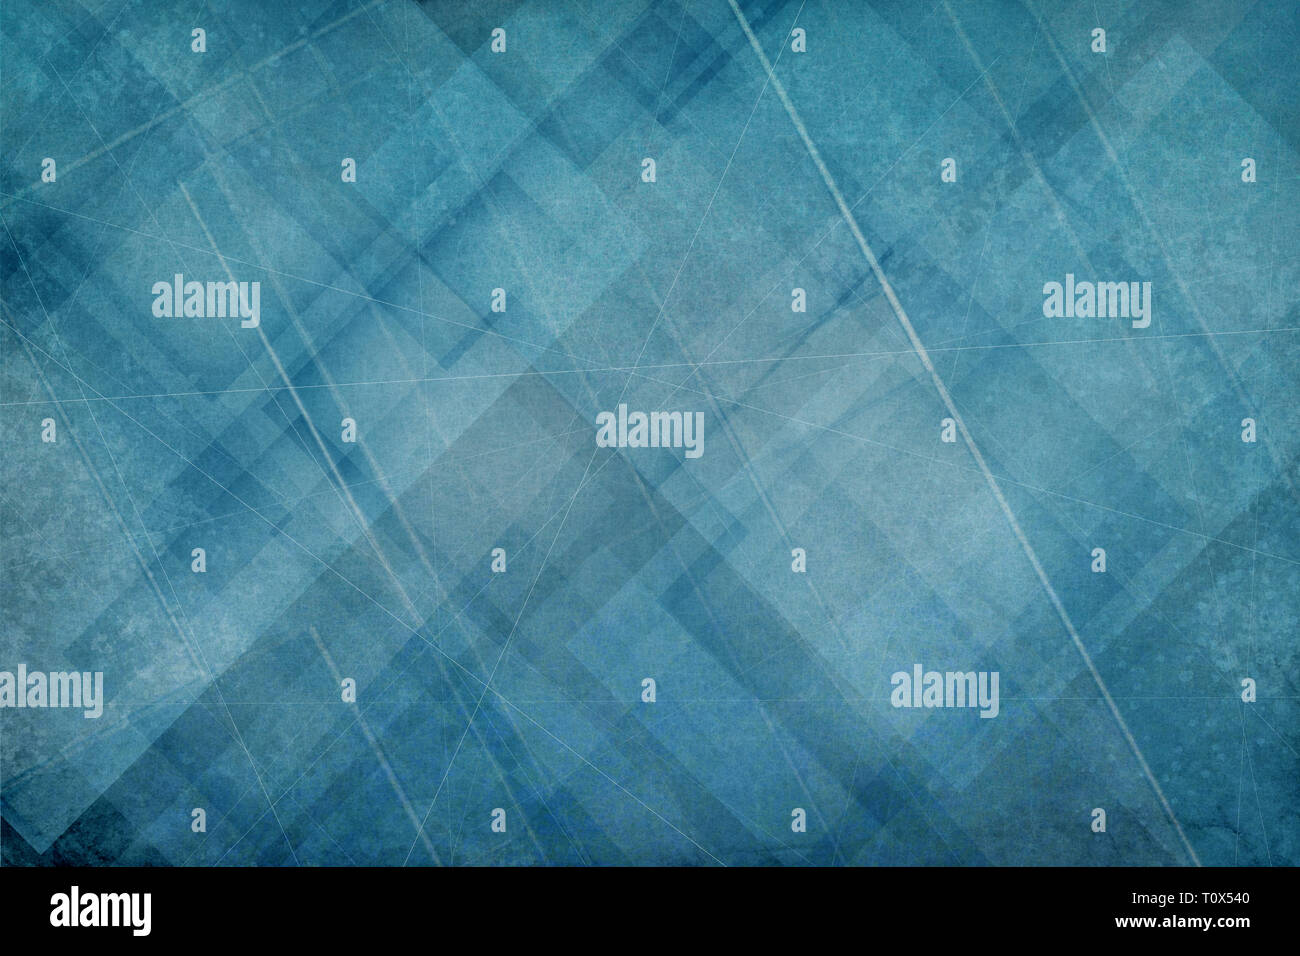 abstract blue background with layers of white diamond and triangle shapes with random lines and scratch mark grunge texture Stock Photo